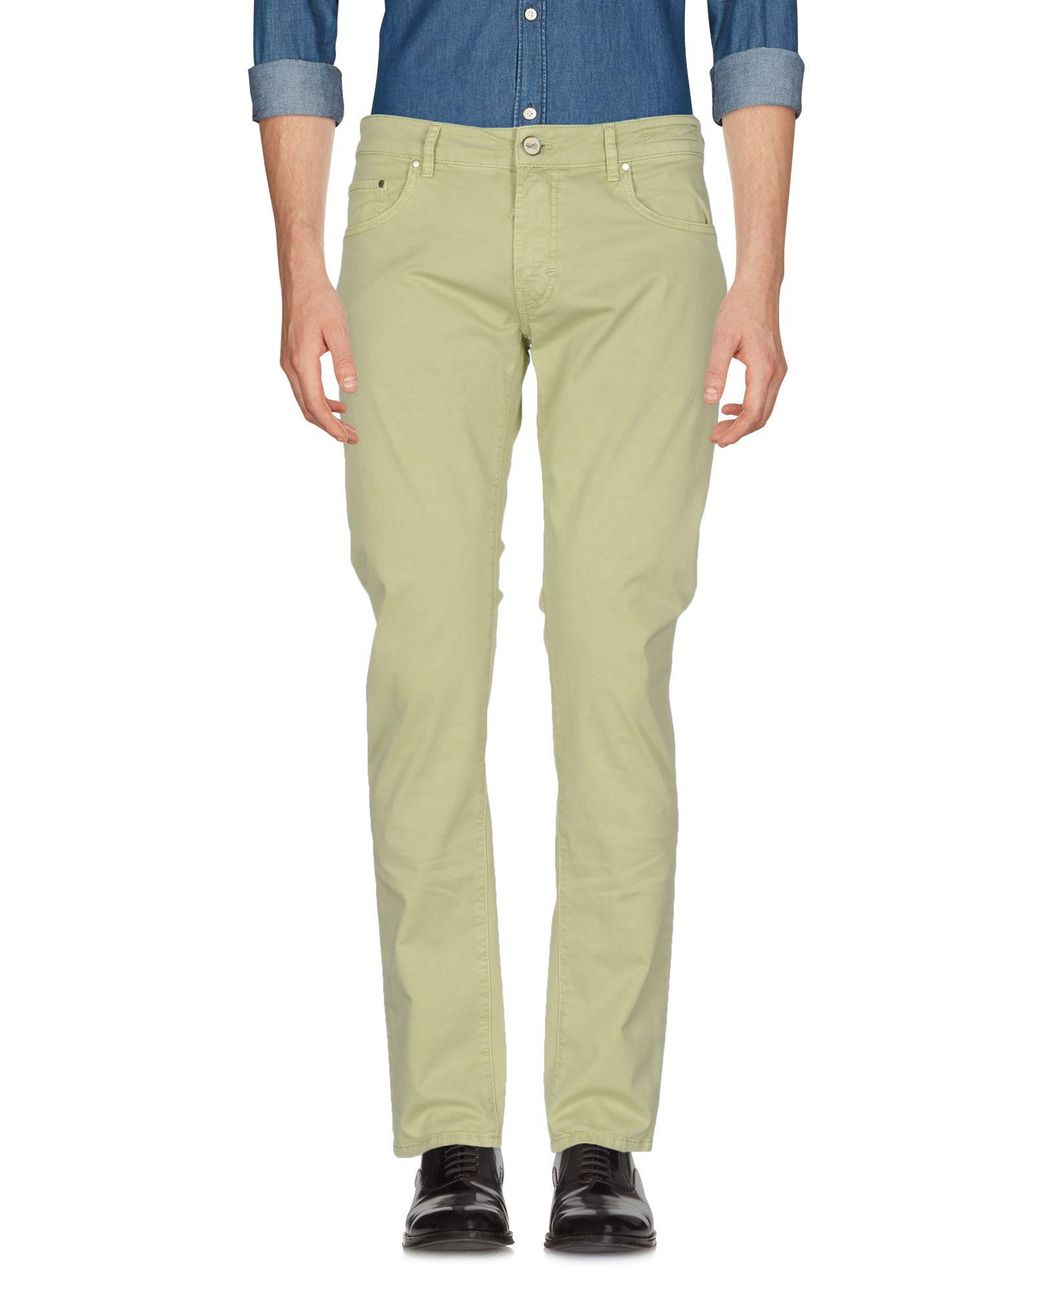 Pt05 Cotton Casual Pants in Light Green (Green) for Men - Lyst